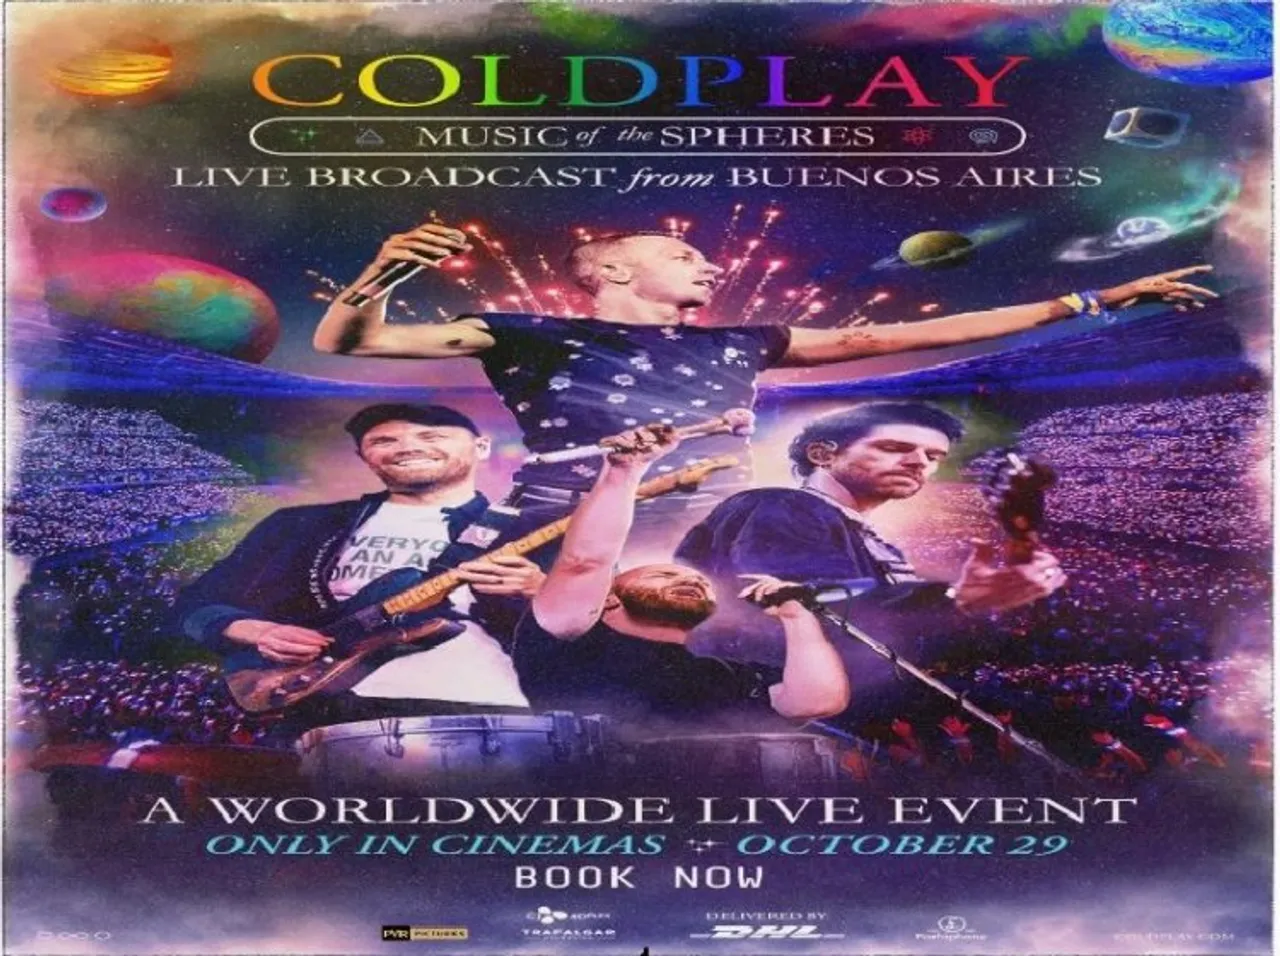 Coldplay, at cinema near you! PVR Pictures to release live theatrical